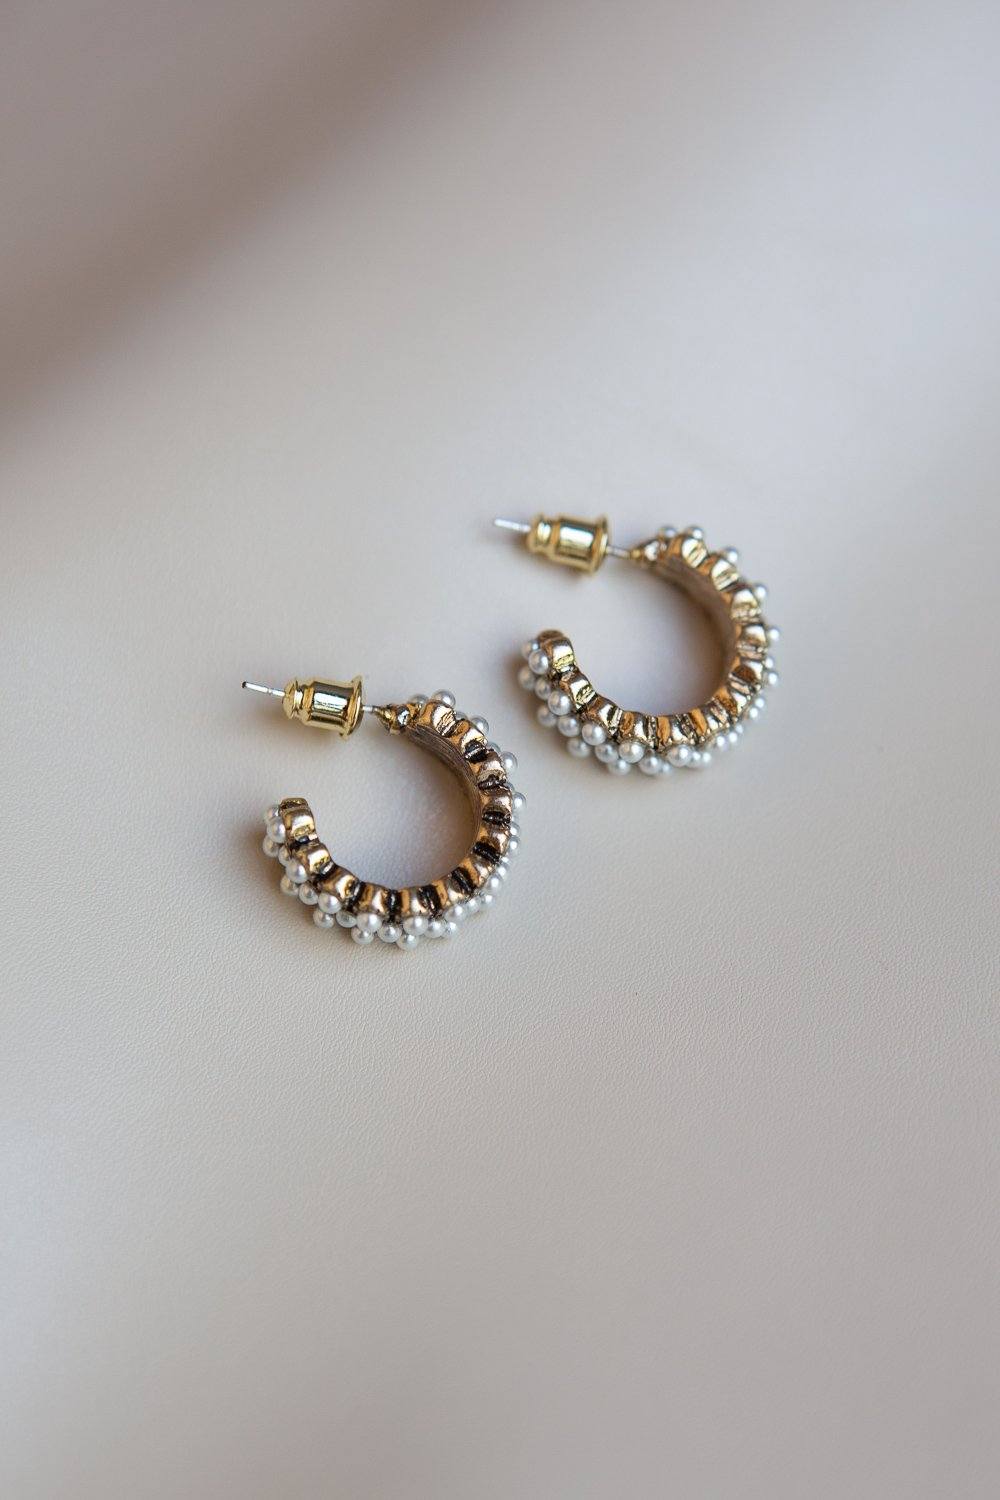 Antique Gold Hoops with Pearl Accents - Wynter Bloom